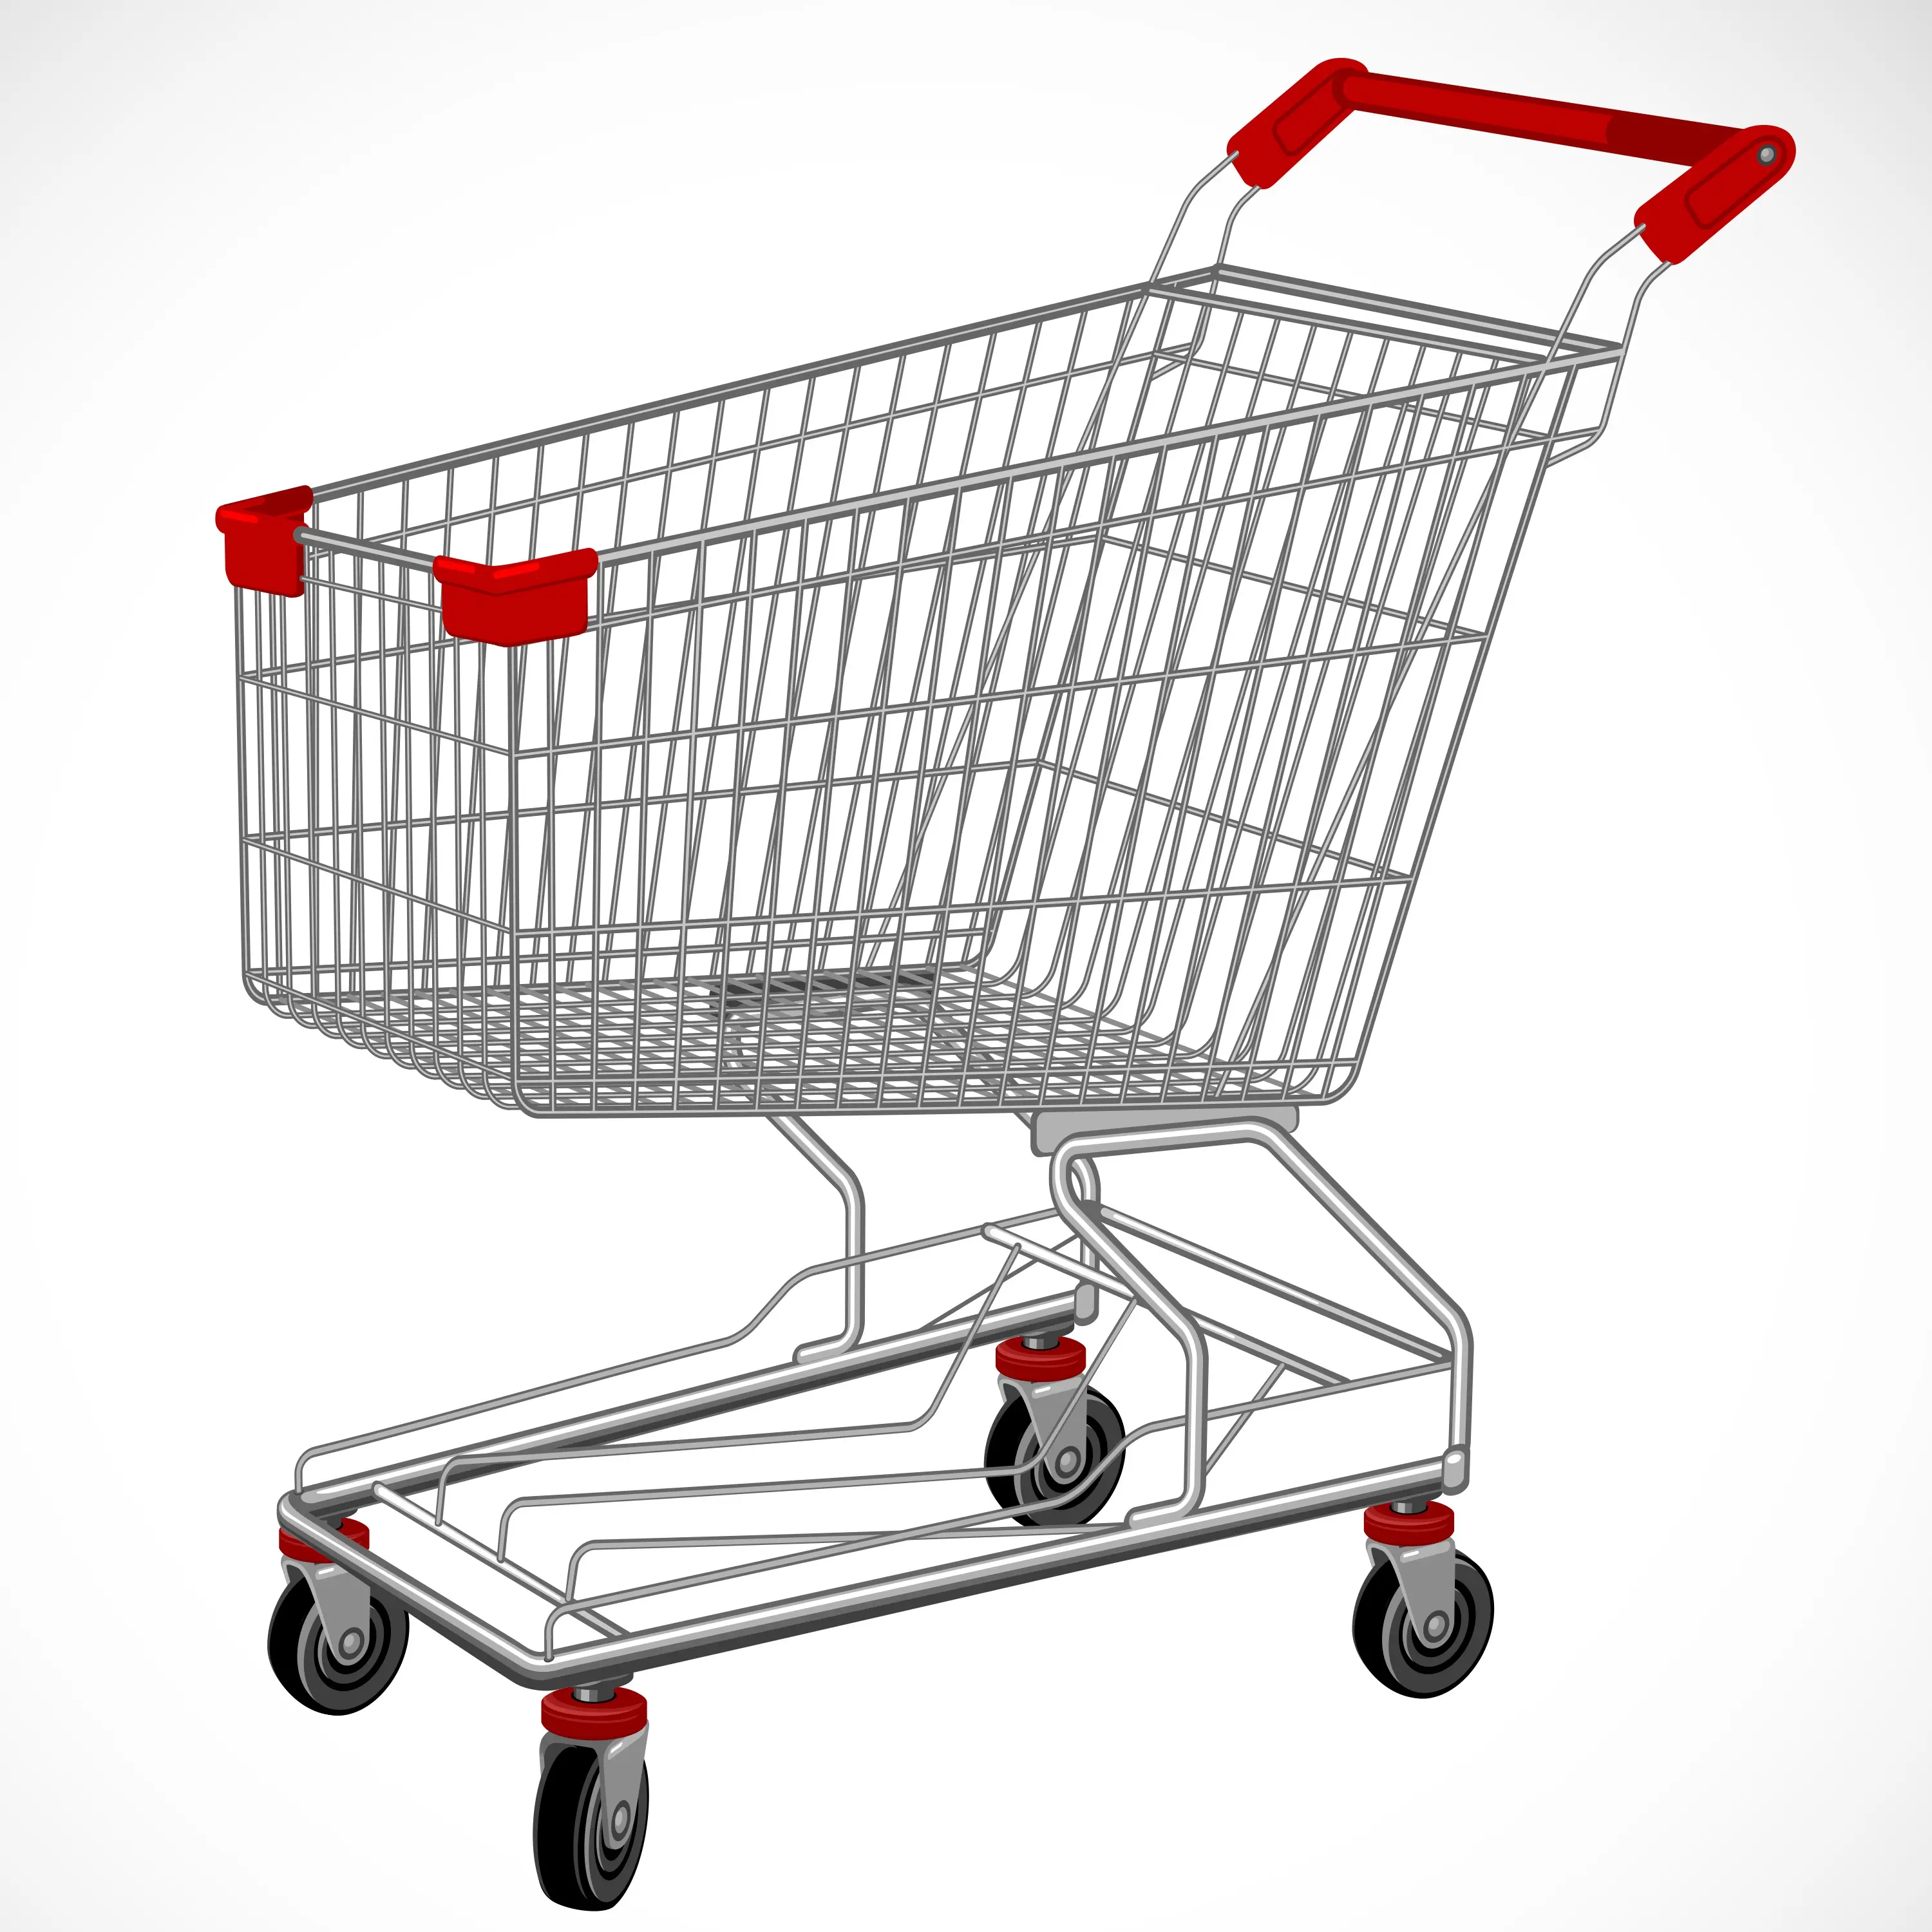 Shopping trolley supermarket carts standard dimensions